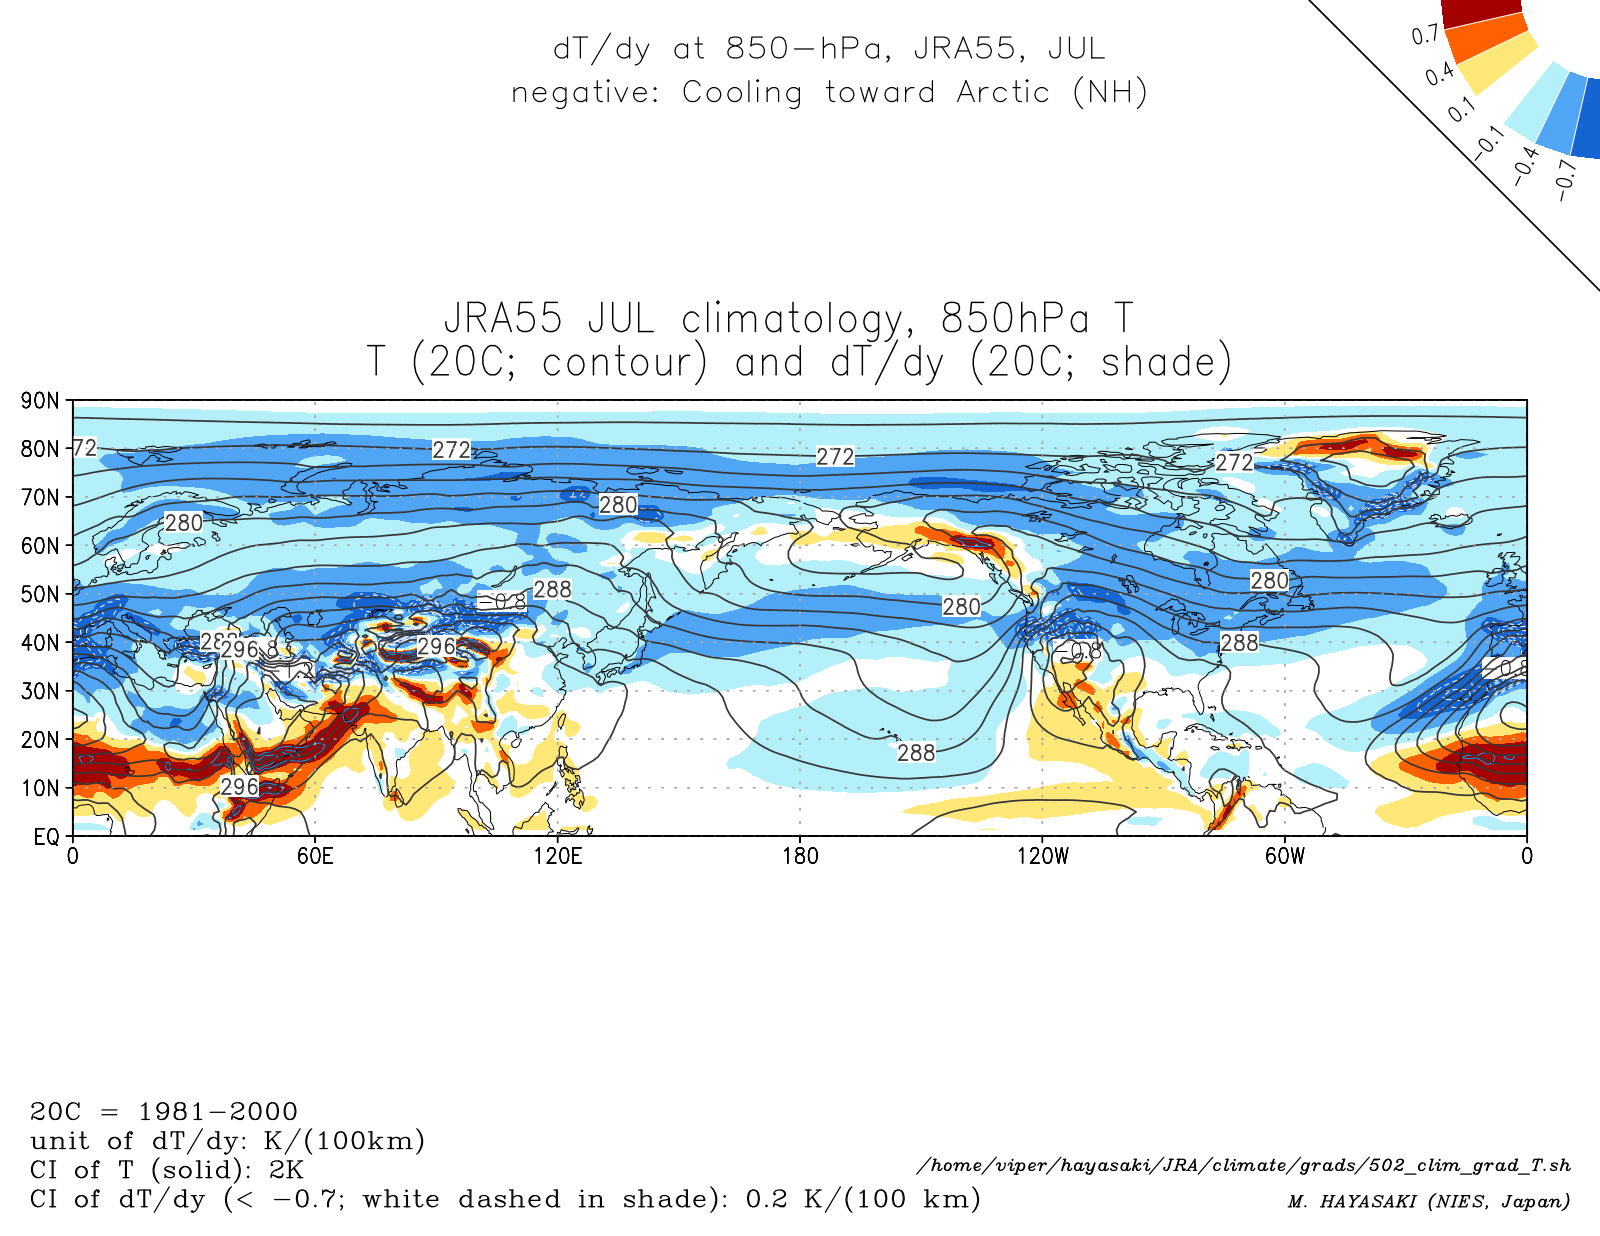 Monthly climatology (July) of dT/dy at 850-hPa in the NH